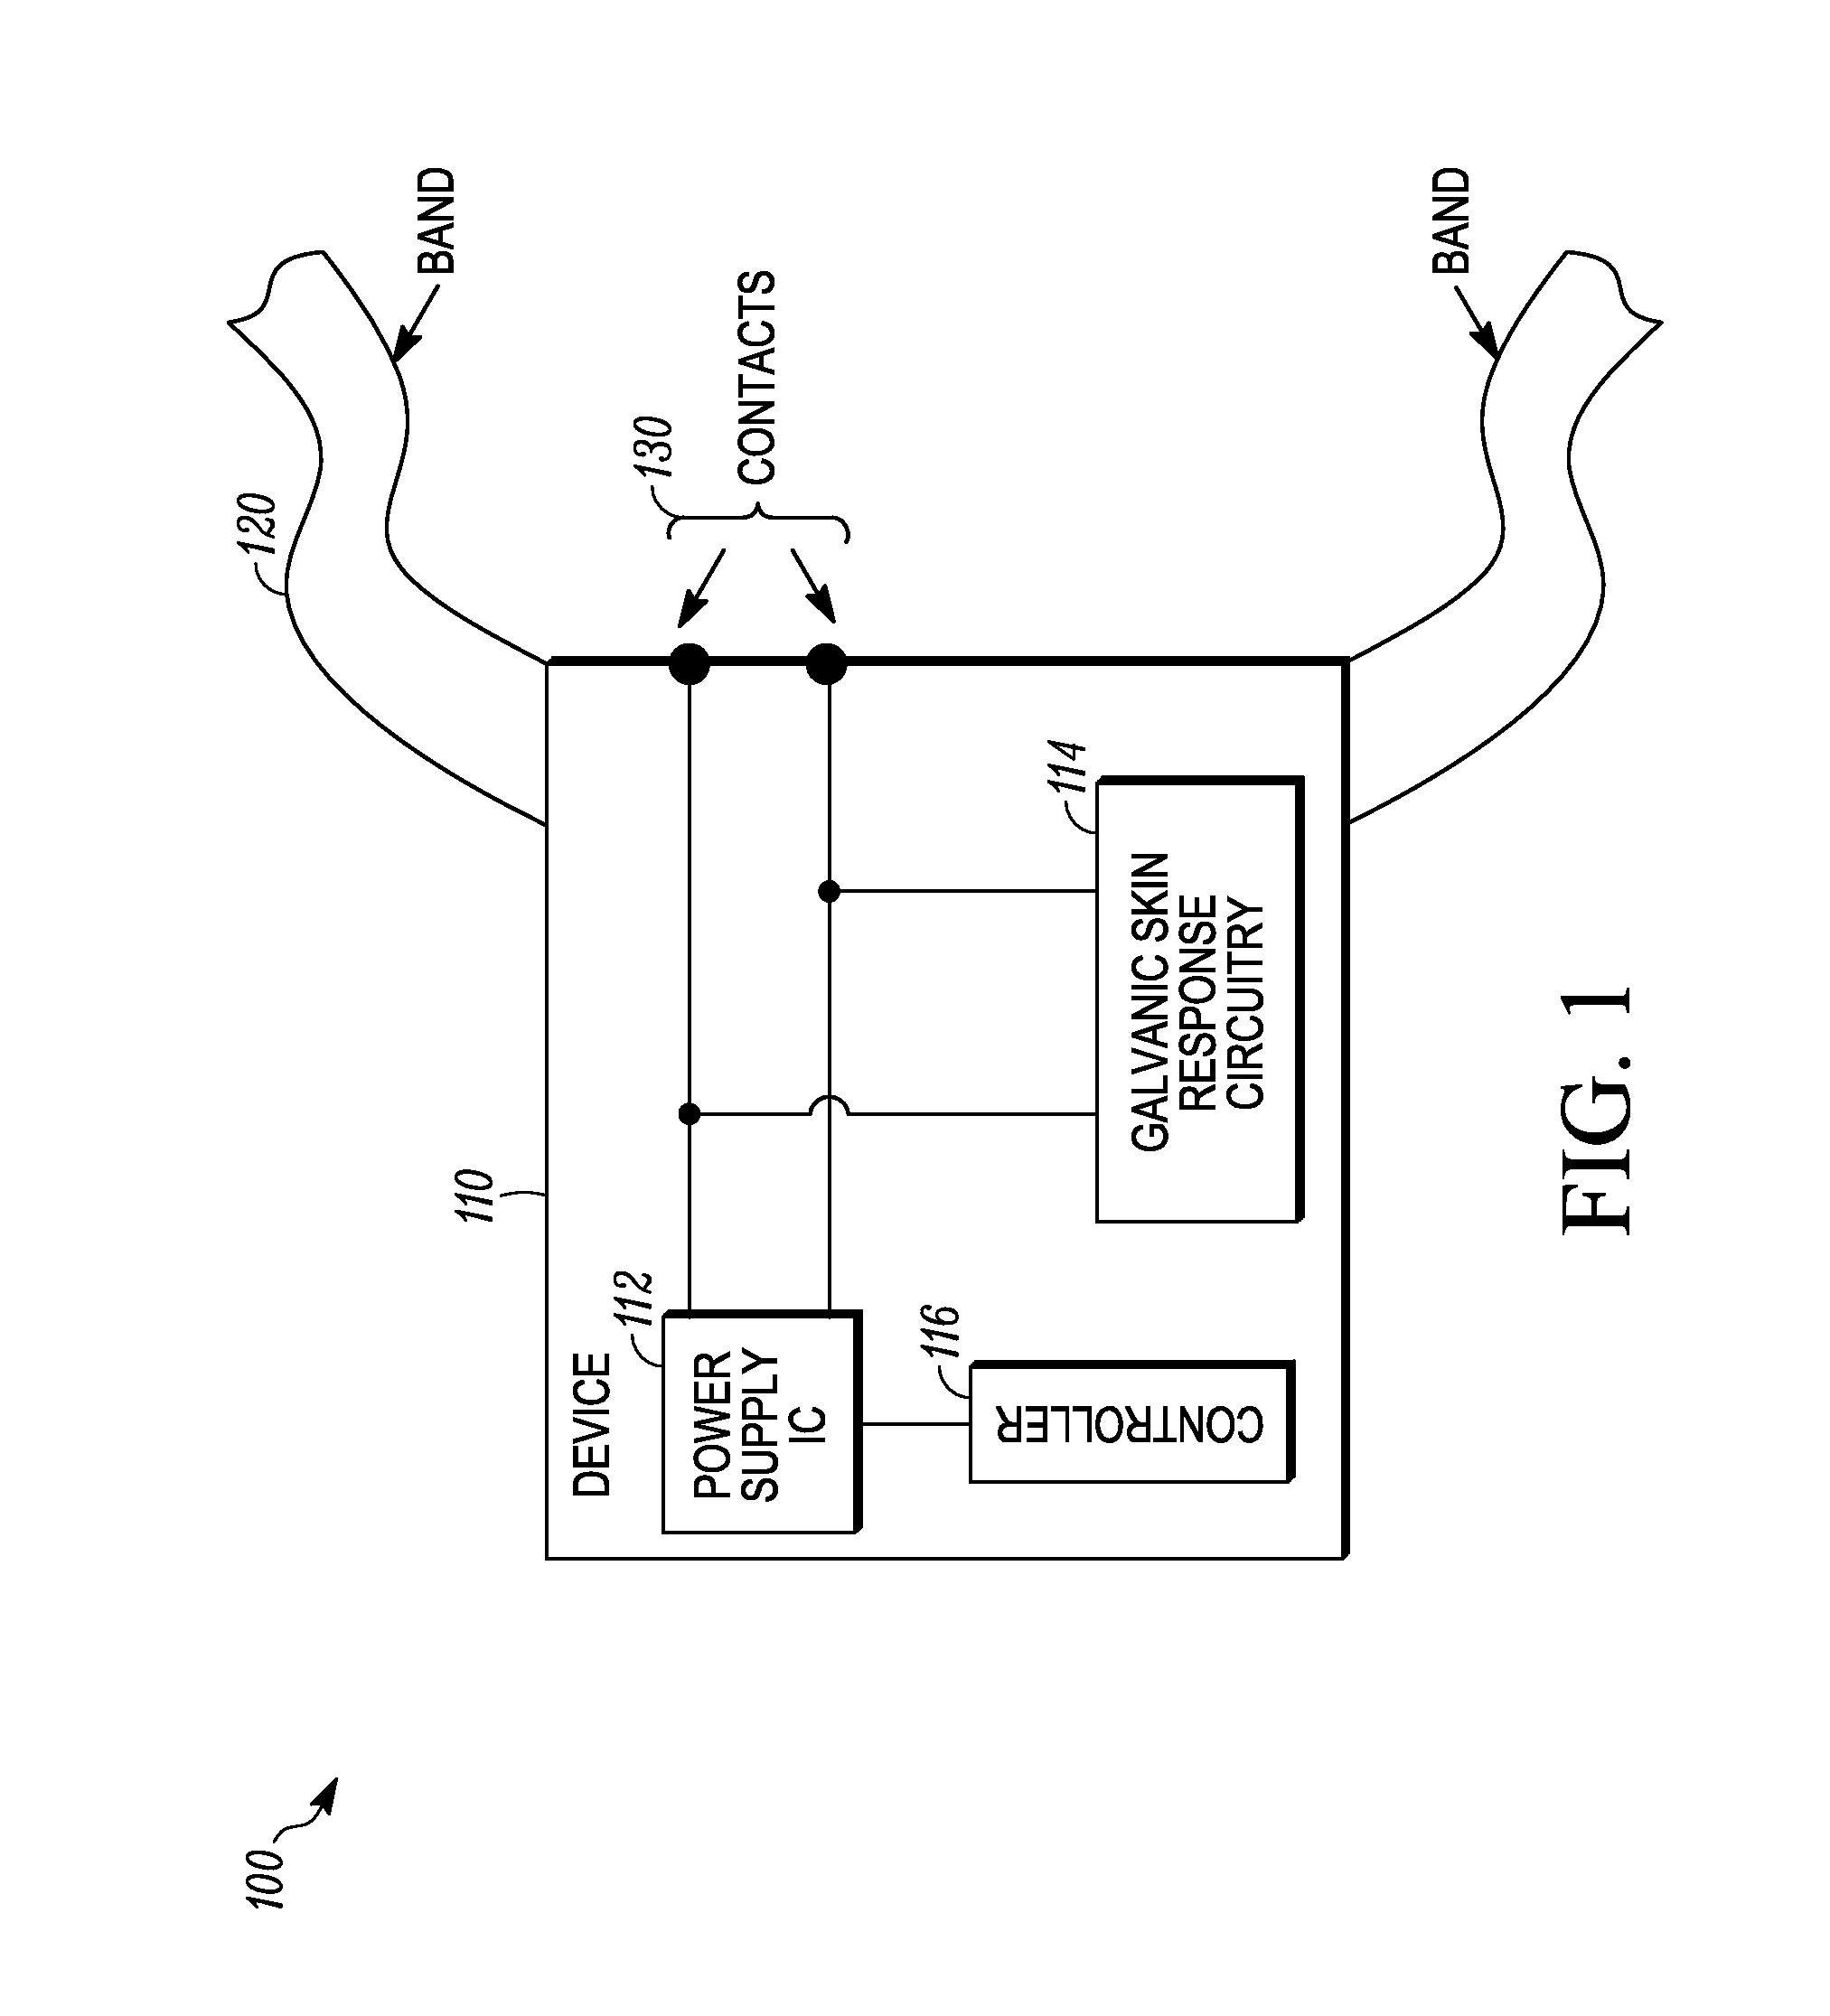 System for enabling reliable skin contract of an electrical wearable device